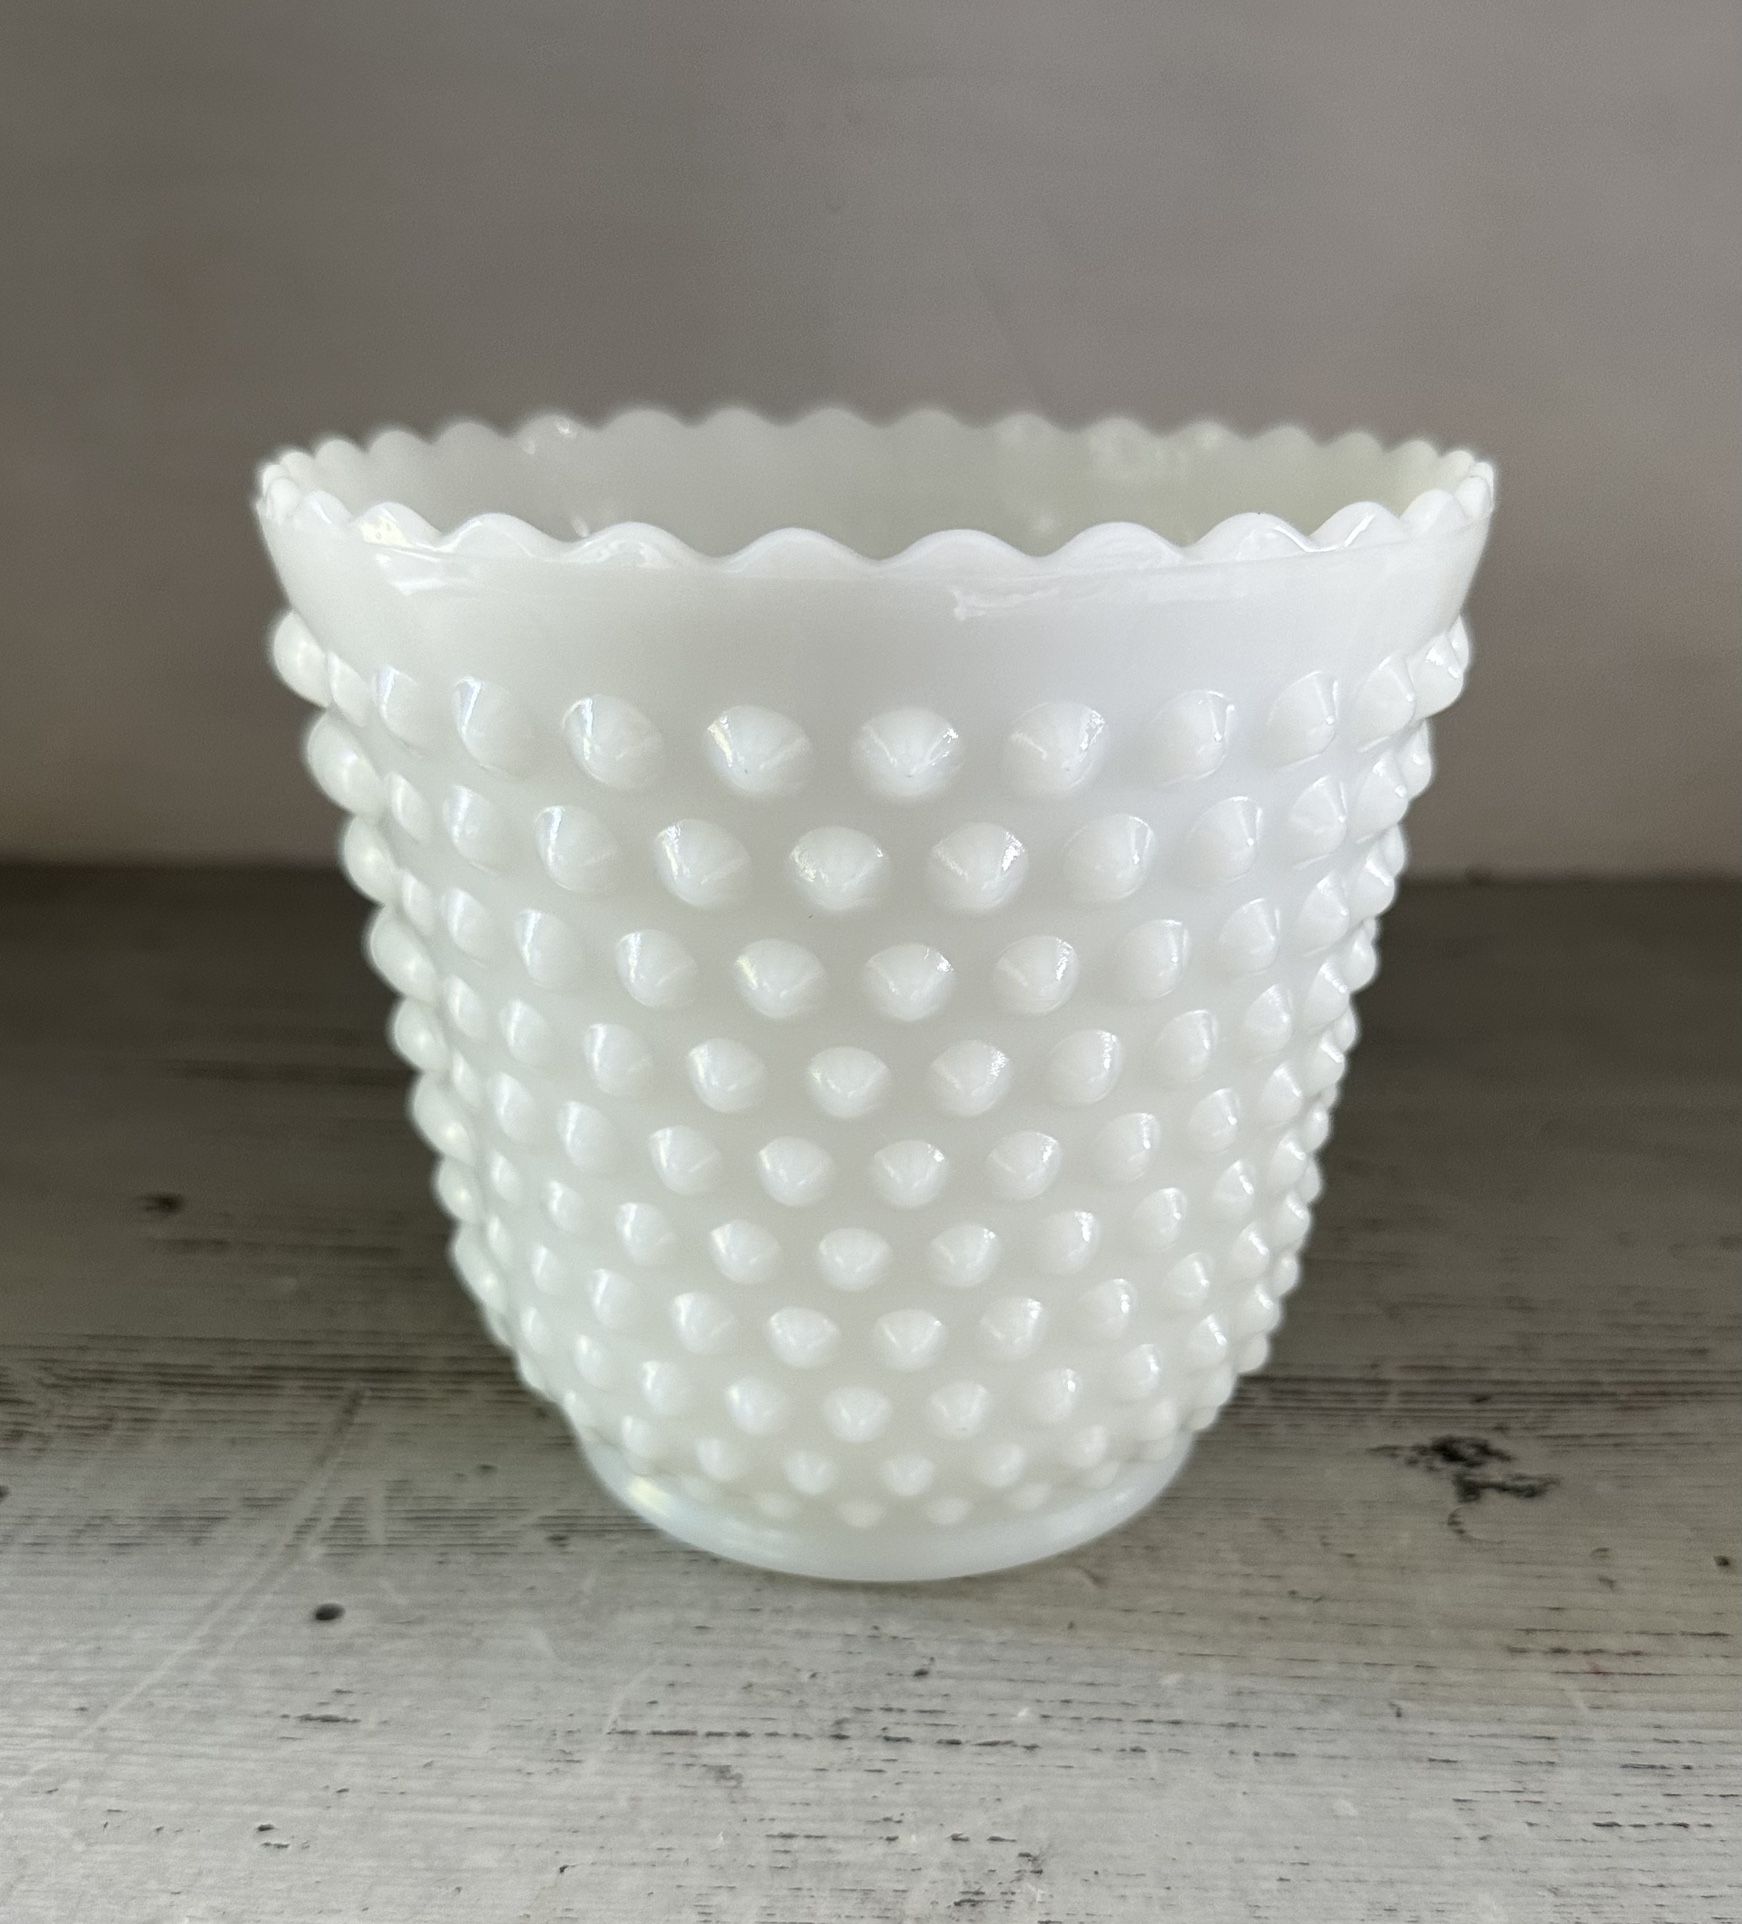 Vintage Milk glass hobnail planter/vase. This is the larger size 5 1/4” Tall X 5 1/2” W At The Top